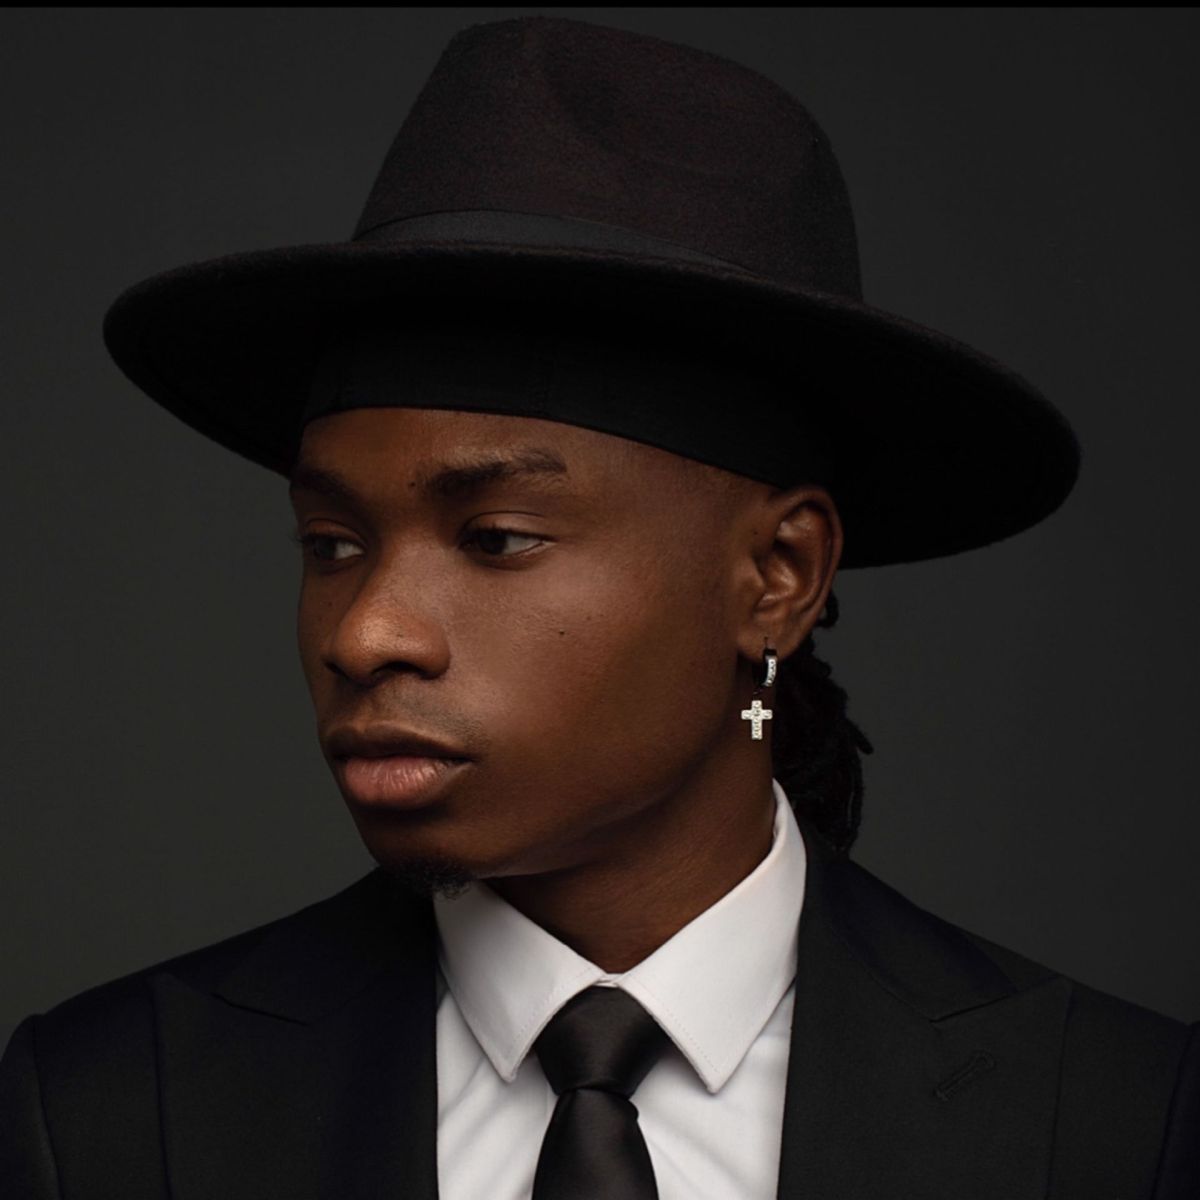 Review: &Quot;Good Bad Boy&Quot; By Lil Kesh 1